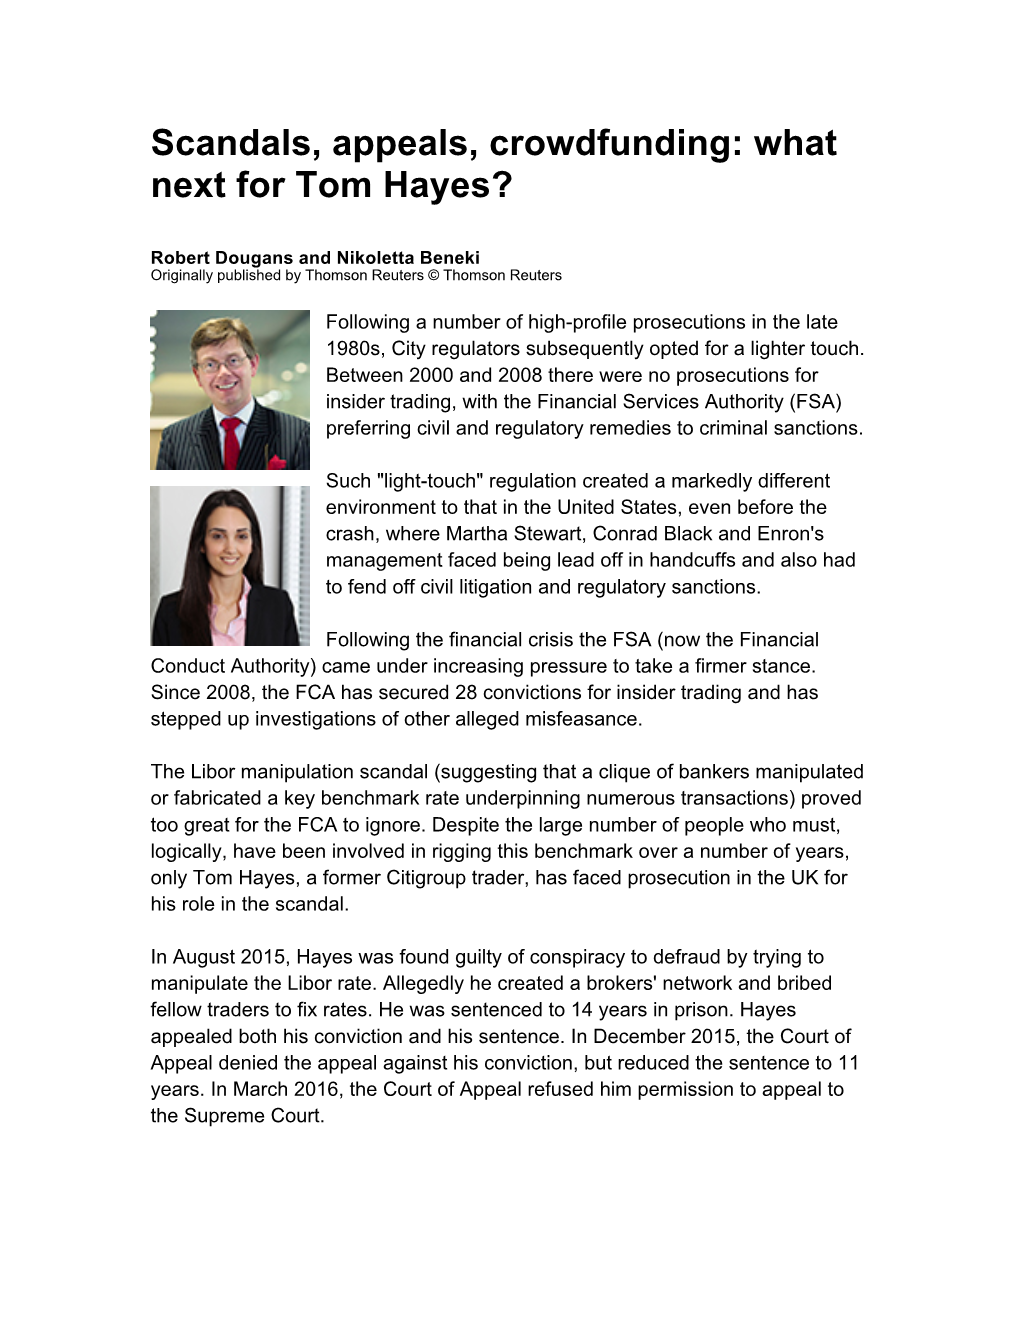 Scandals, Appeals, Crowdfunding: What Next for Tom Hayes?